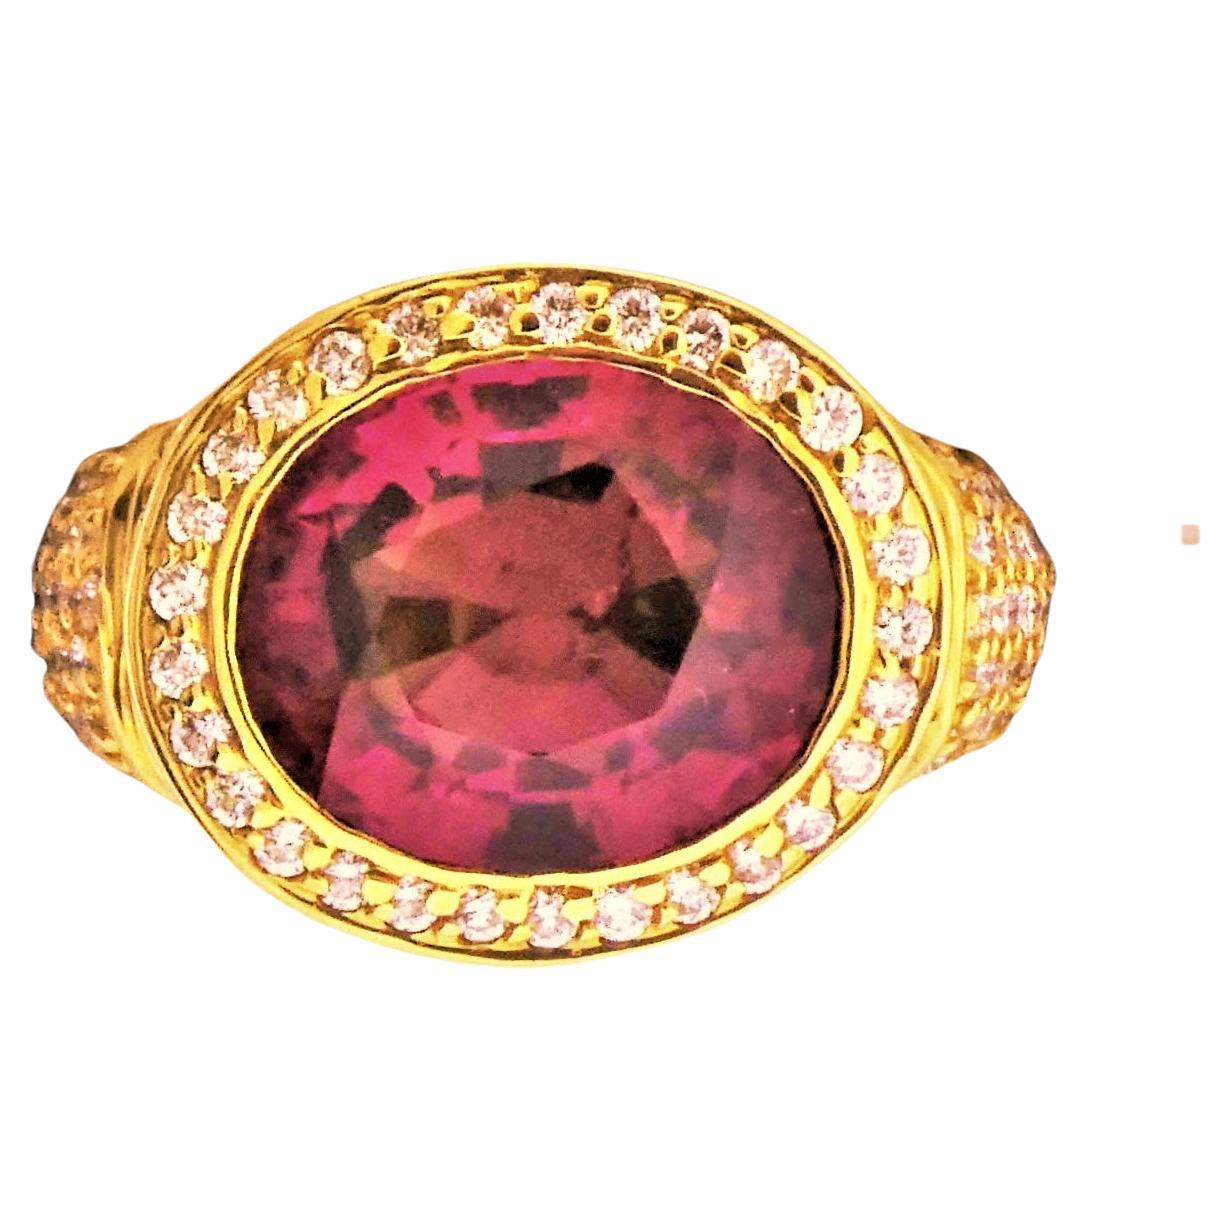 The Redish Pink Tourmaline (5.82 cts) created from Afghanistan rough material is set in an 18K Yellow Gold mounting that weighs 12.5 grams.  The under bezel and shoulders of the ring contain 147 diamonds that weigh 1.55 cts which are graded as G/H